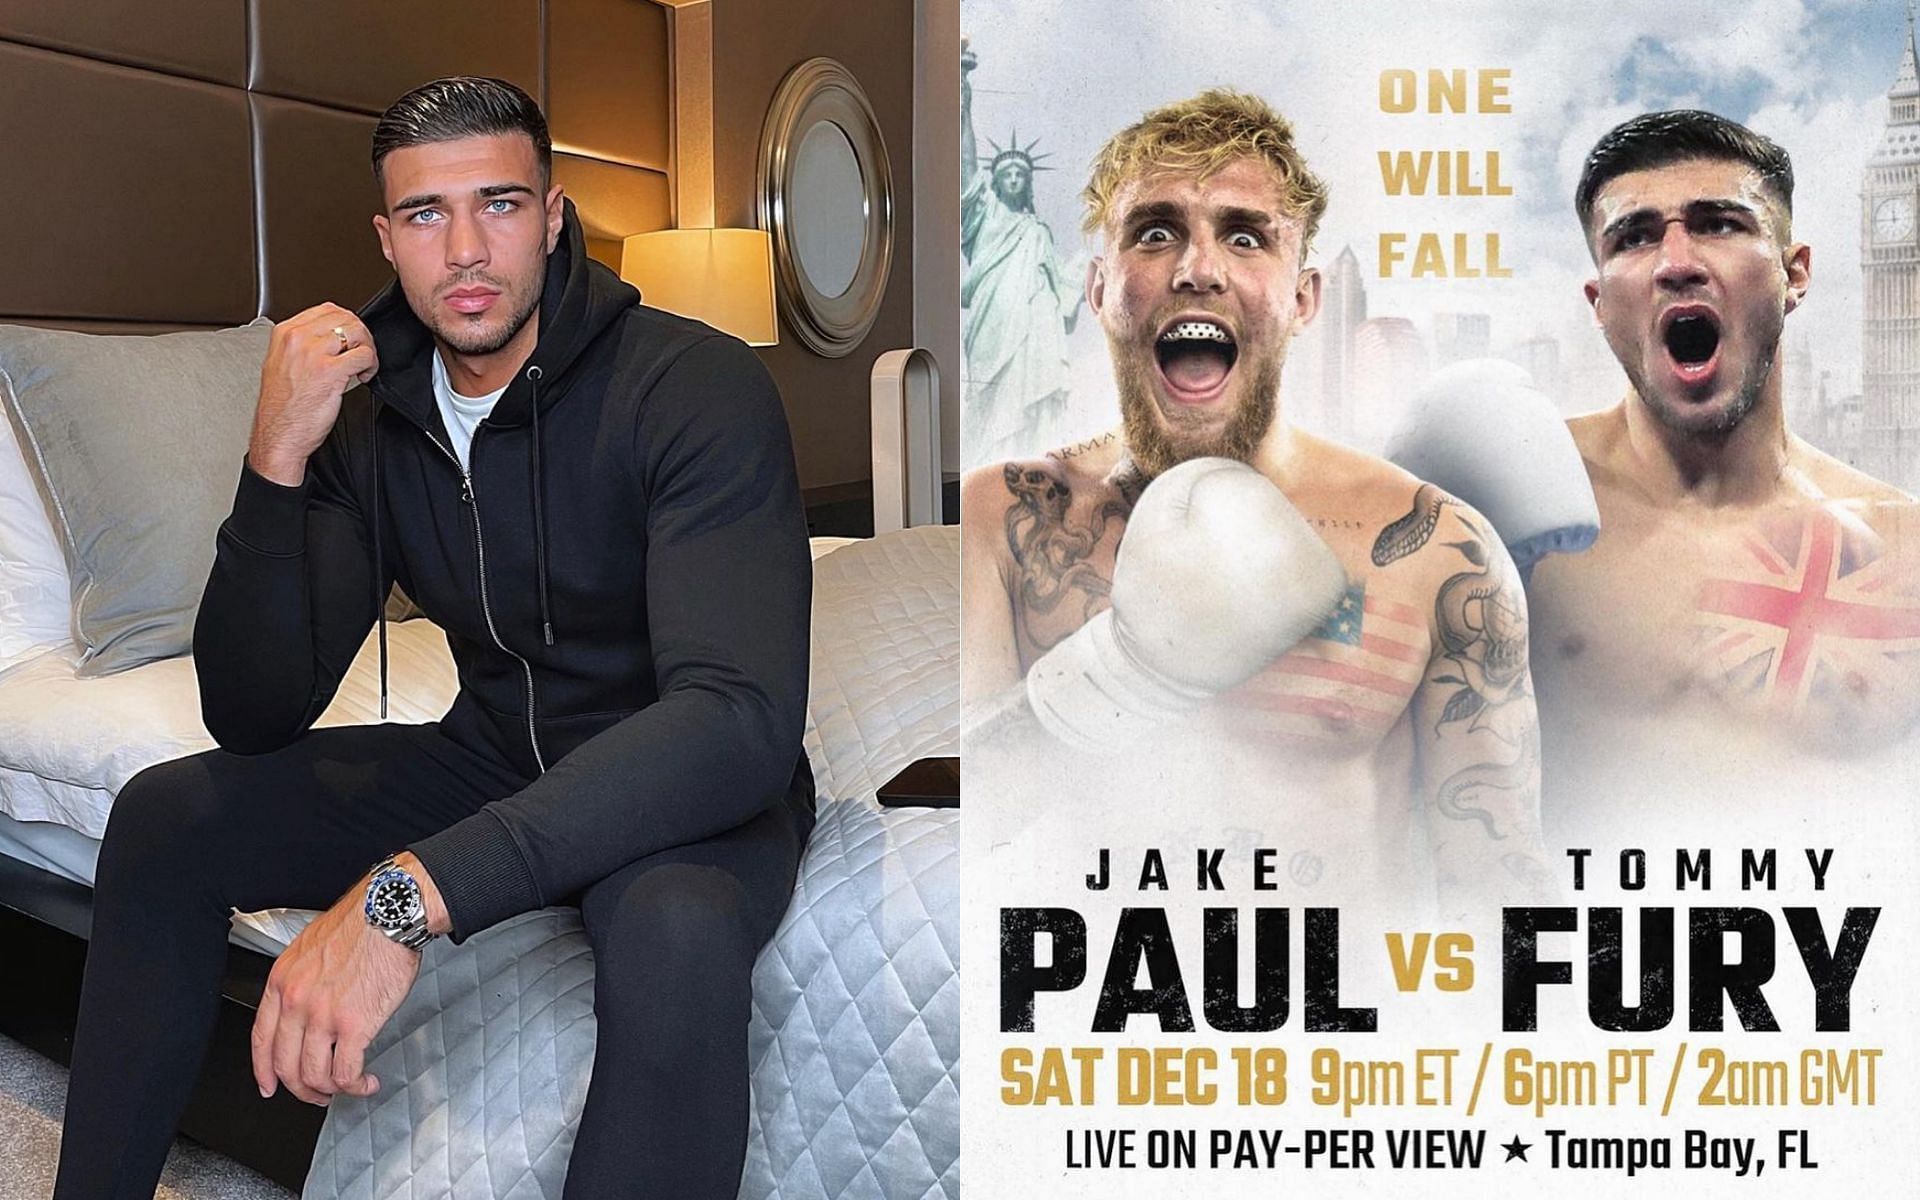 Tommy Fury has pulled out of his boxing match against Jake Paul [image credits: @tommyfury on Instagram]